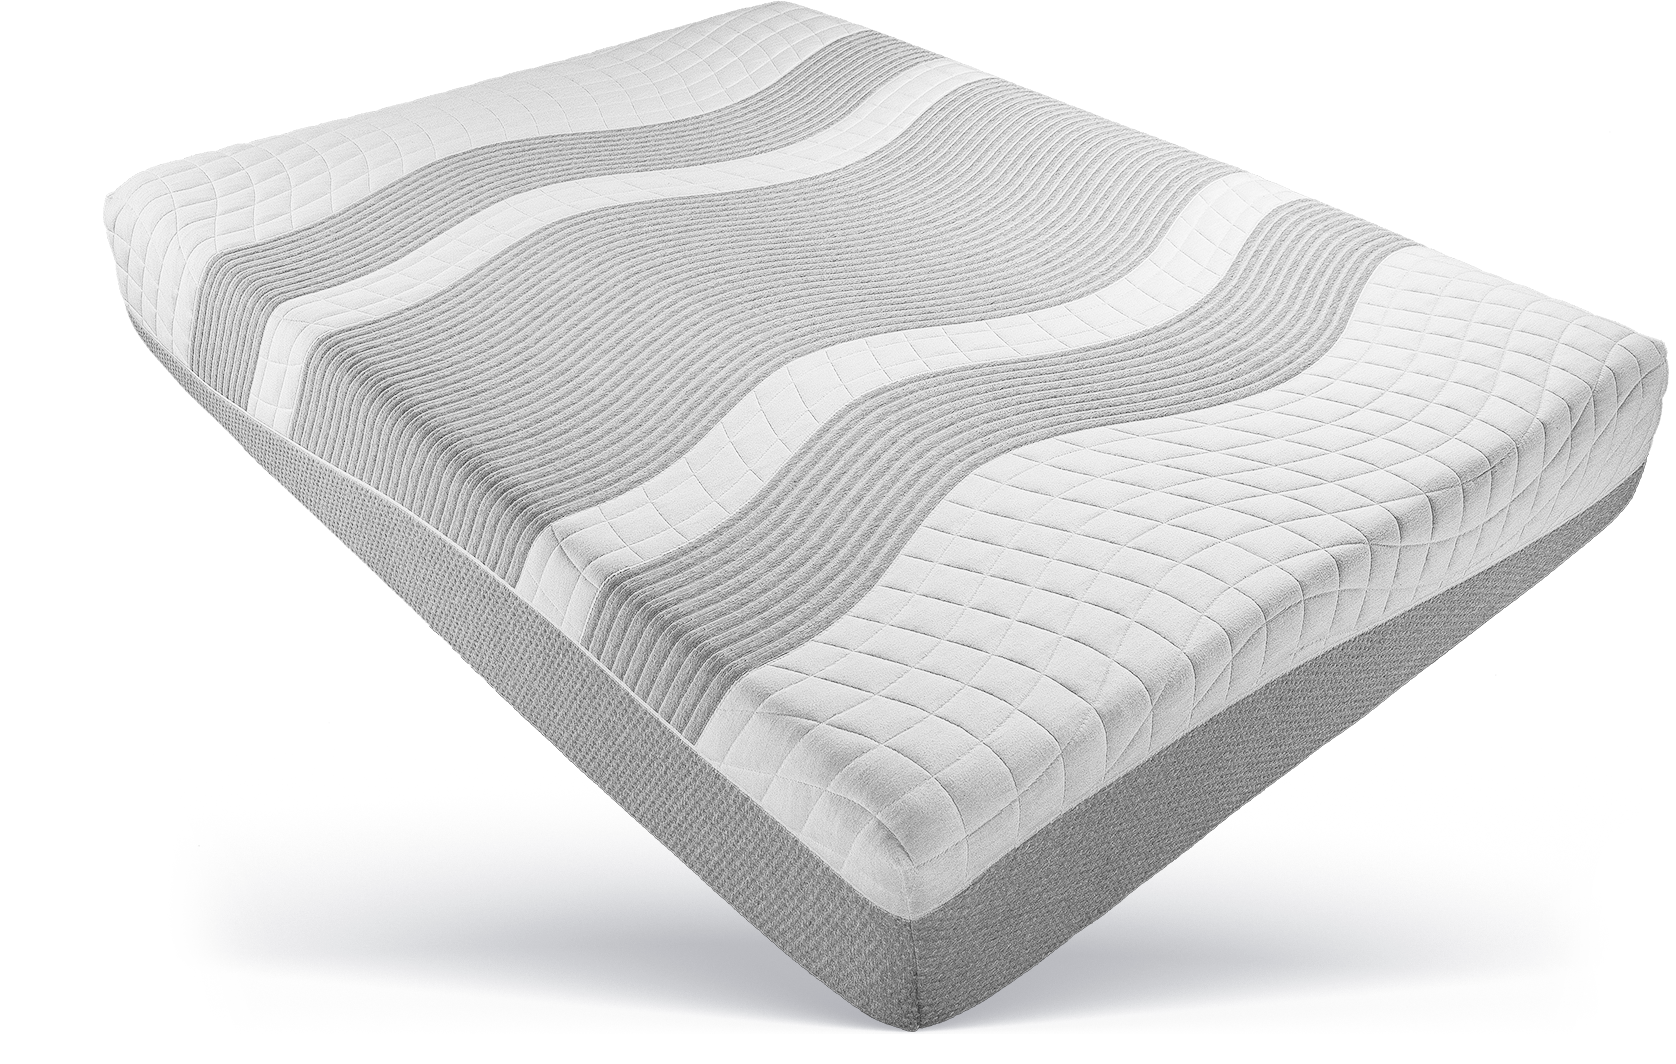 Mattress with waves mattress cover on white and grey background